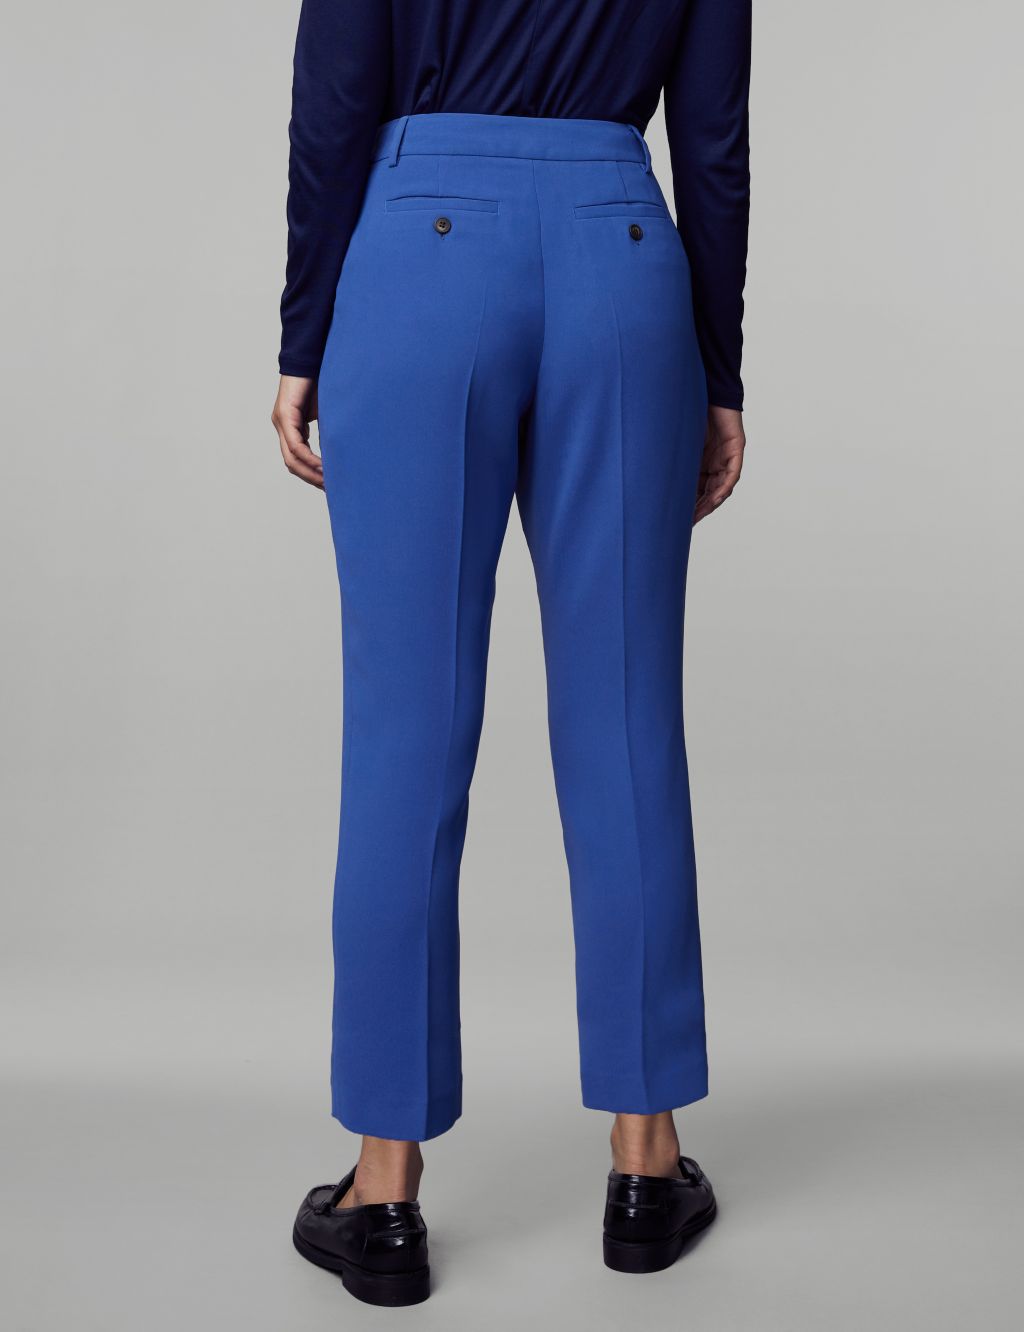 Crepe Straight Leg Ankle Grazer Trousers image 5